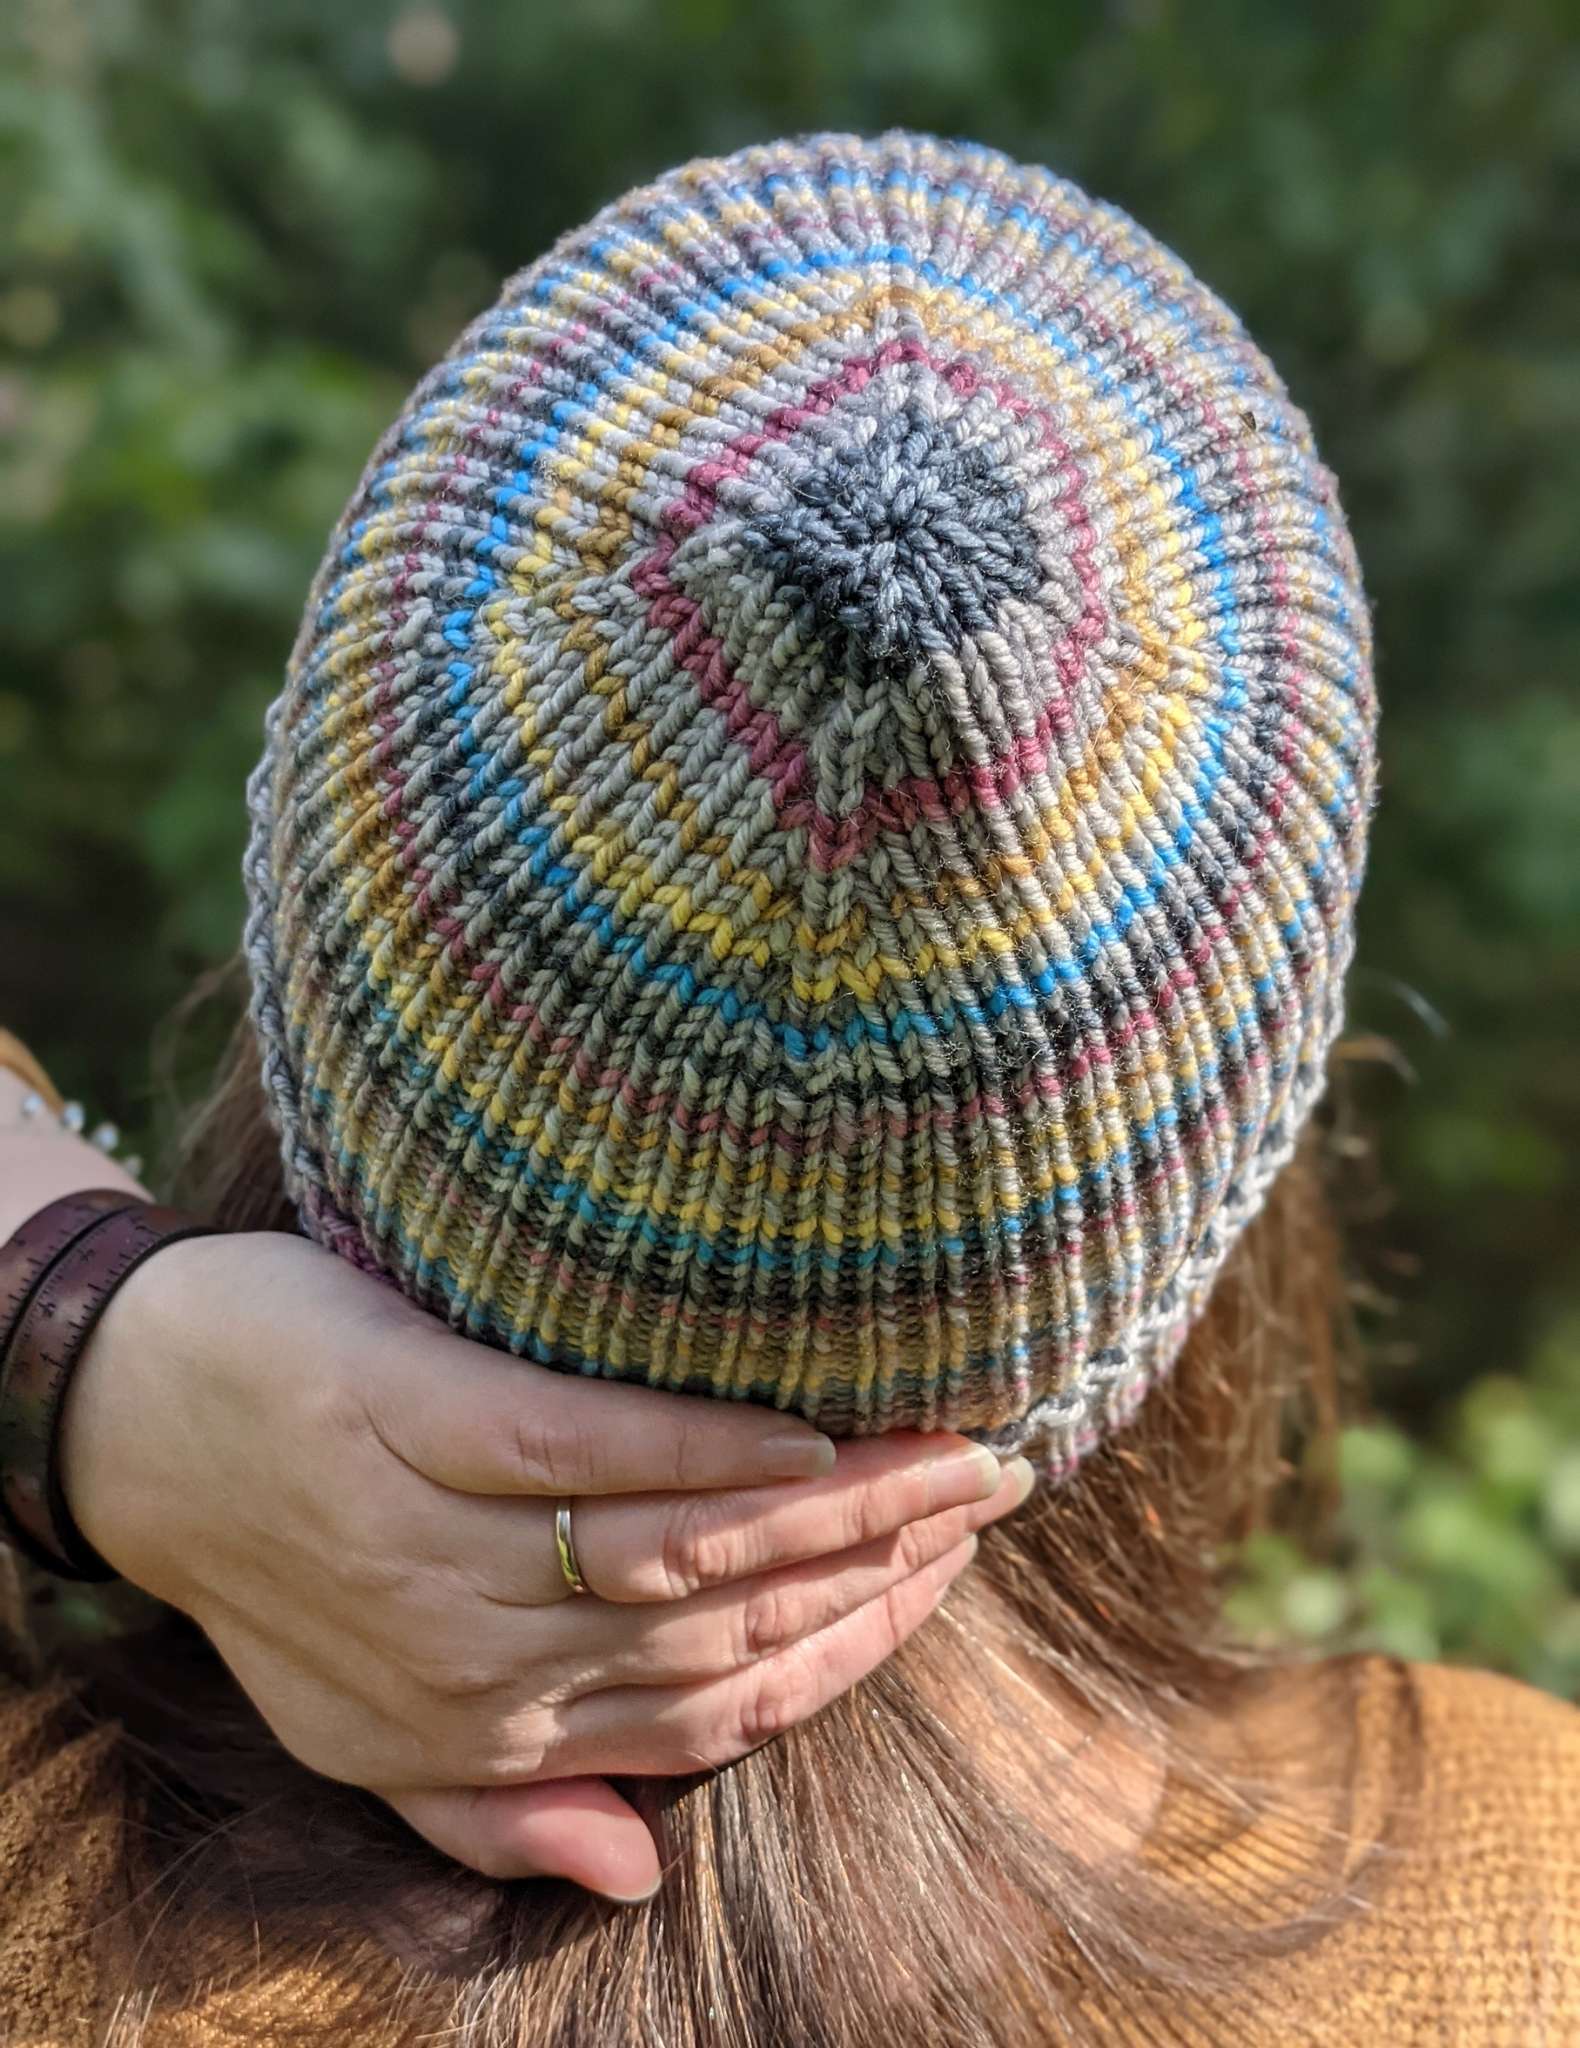 Close up of the crown of a striped hat pictured from behind. The narrow stripes are grey, charcoal, plum, yellow and bright blue.